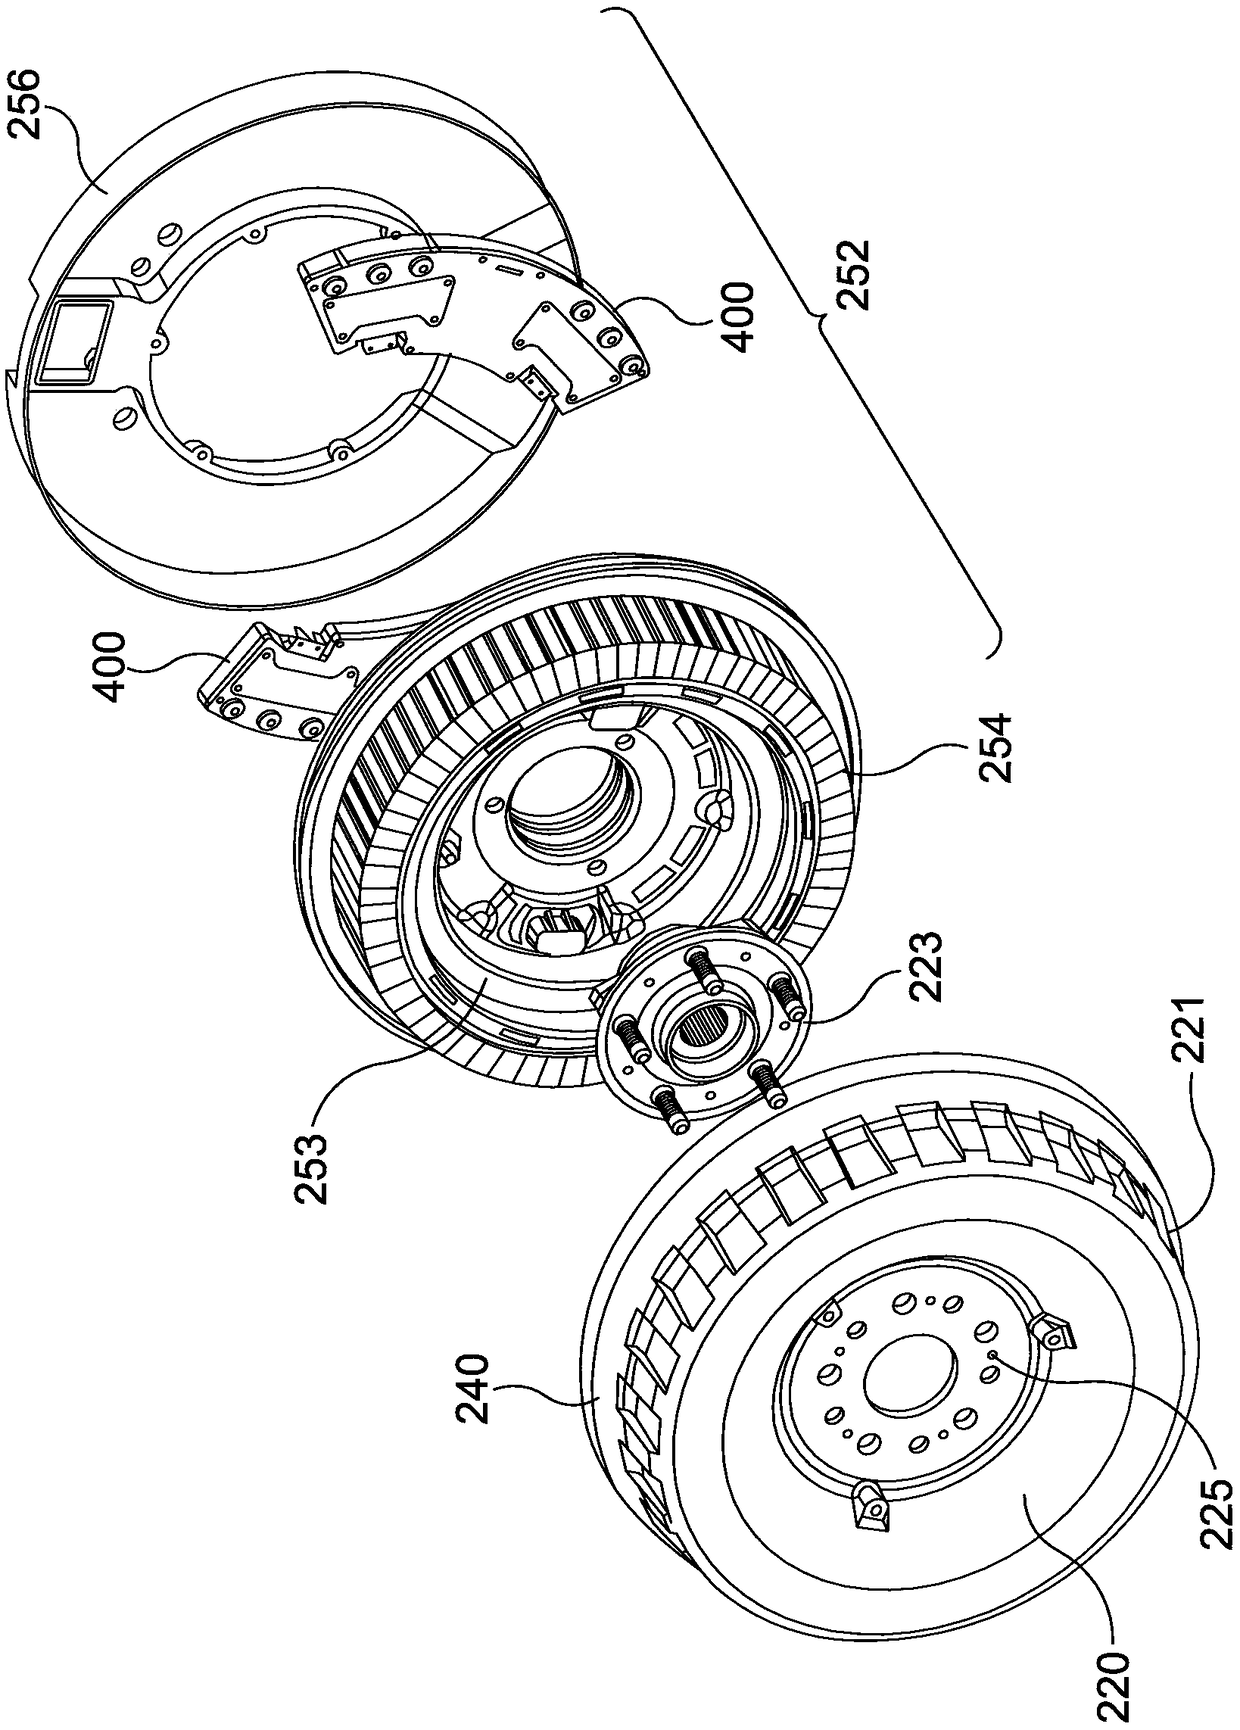 A stator for an electric motor and a method of manufacturing a stator